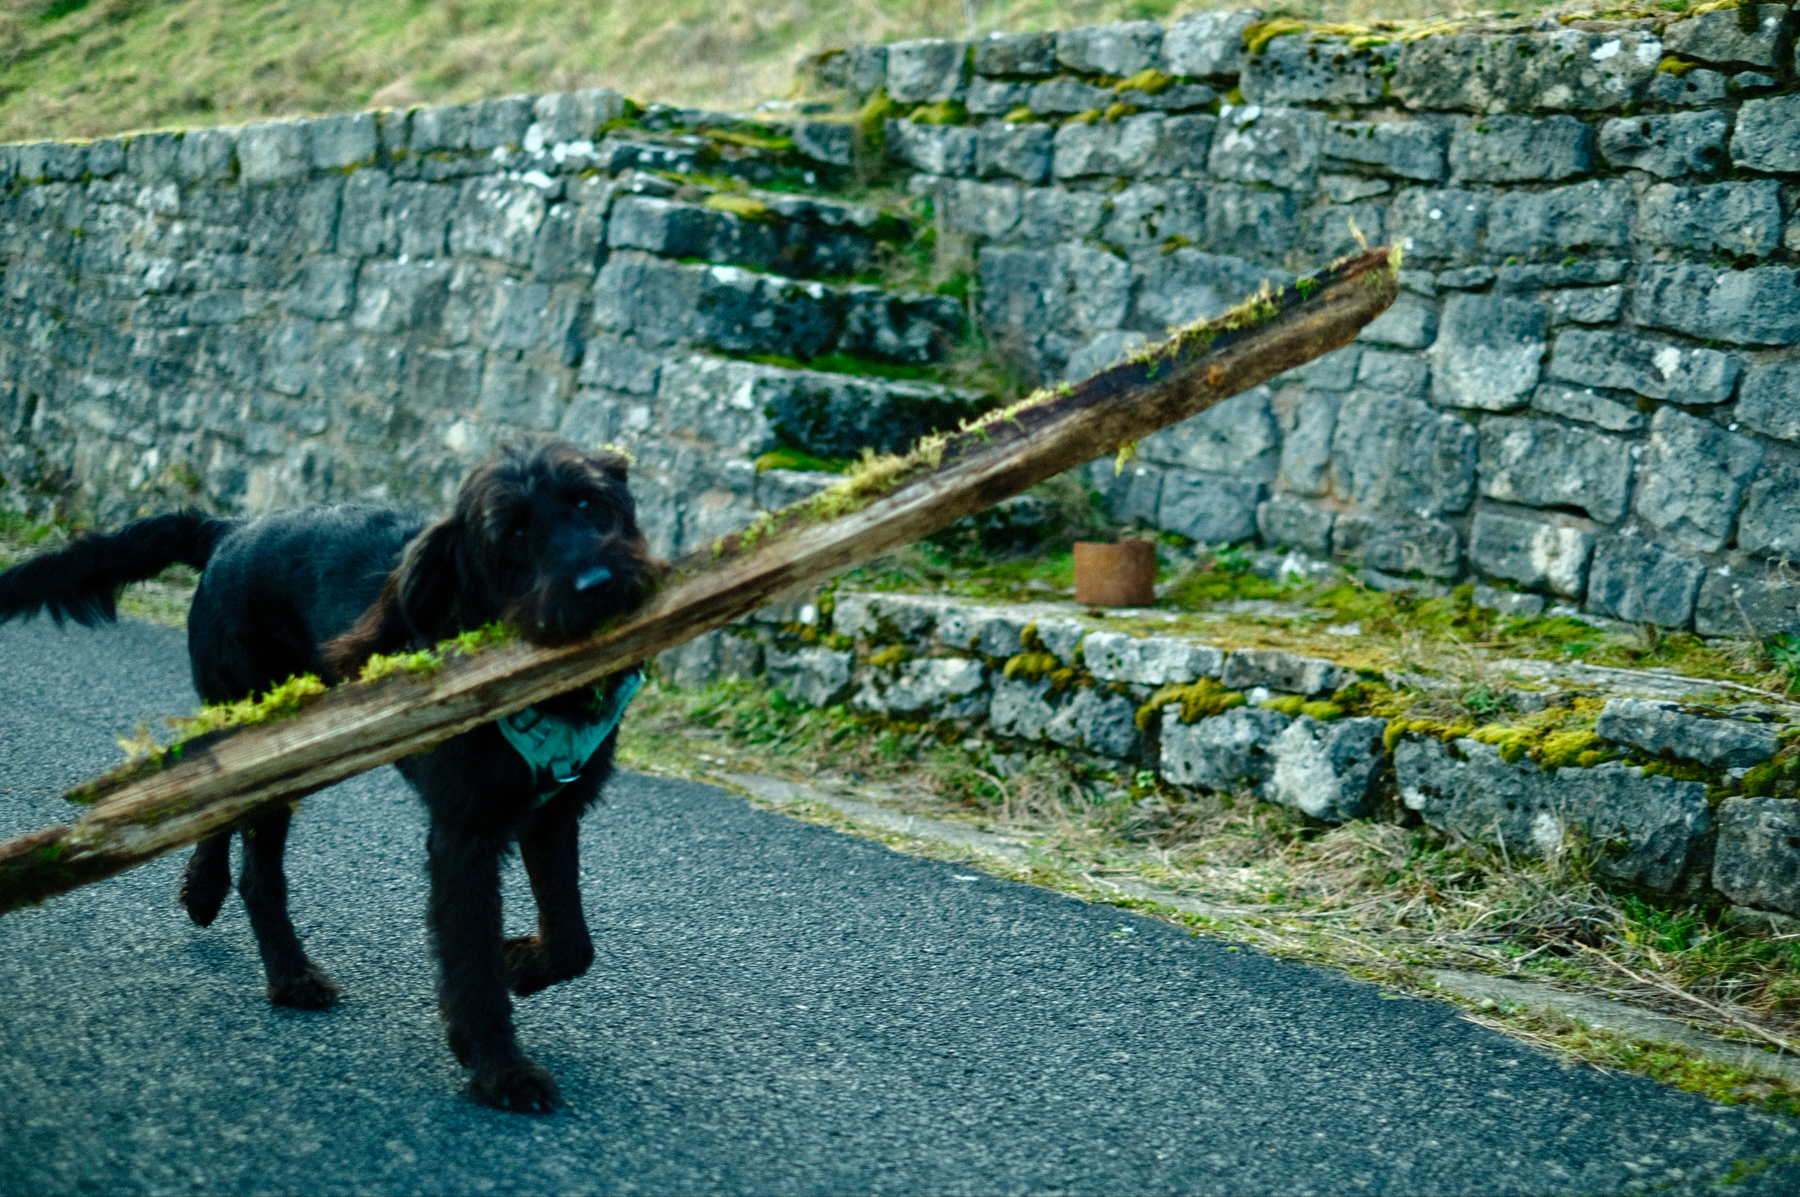 Black dog runs with a long pole in its mouth in front of a vineyard wall